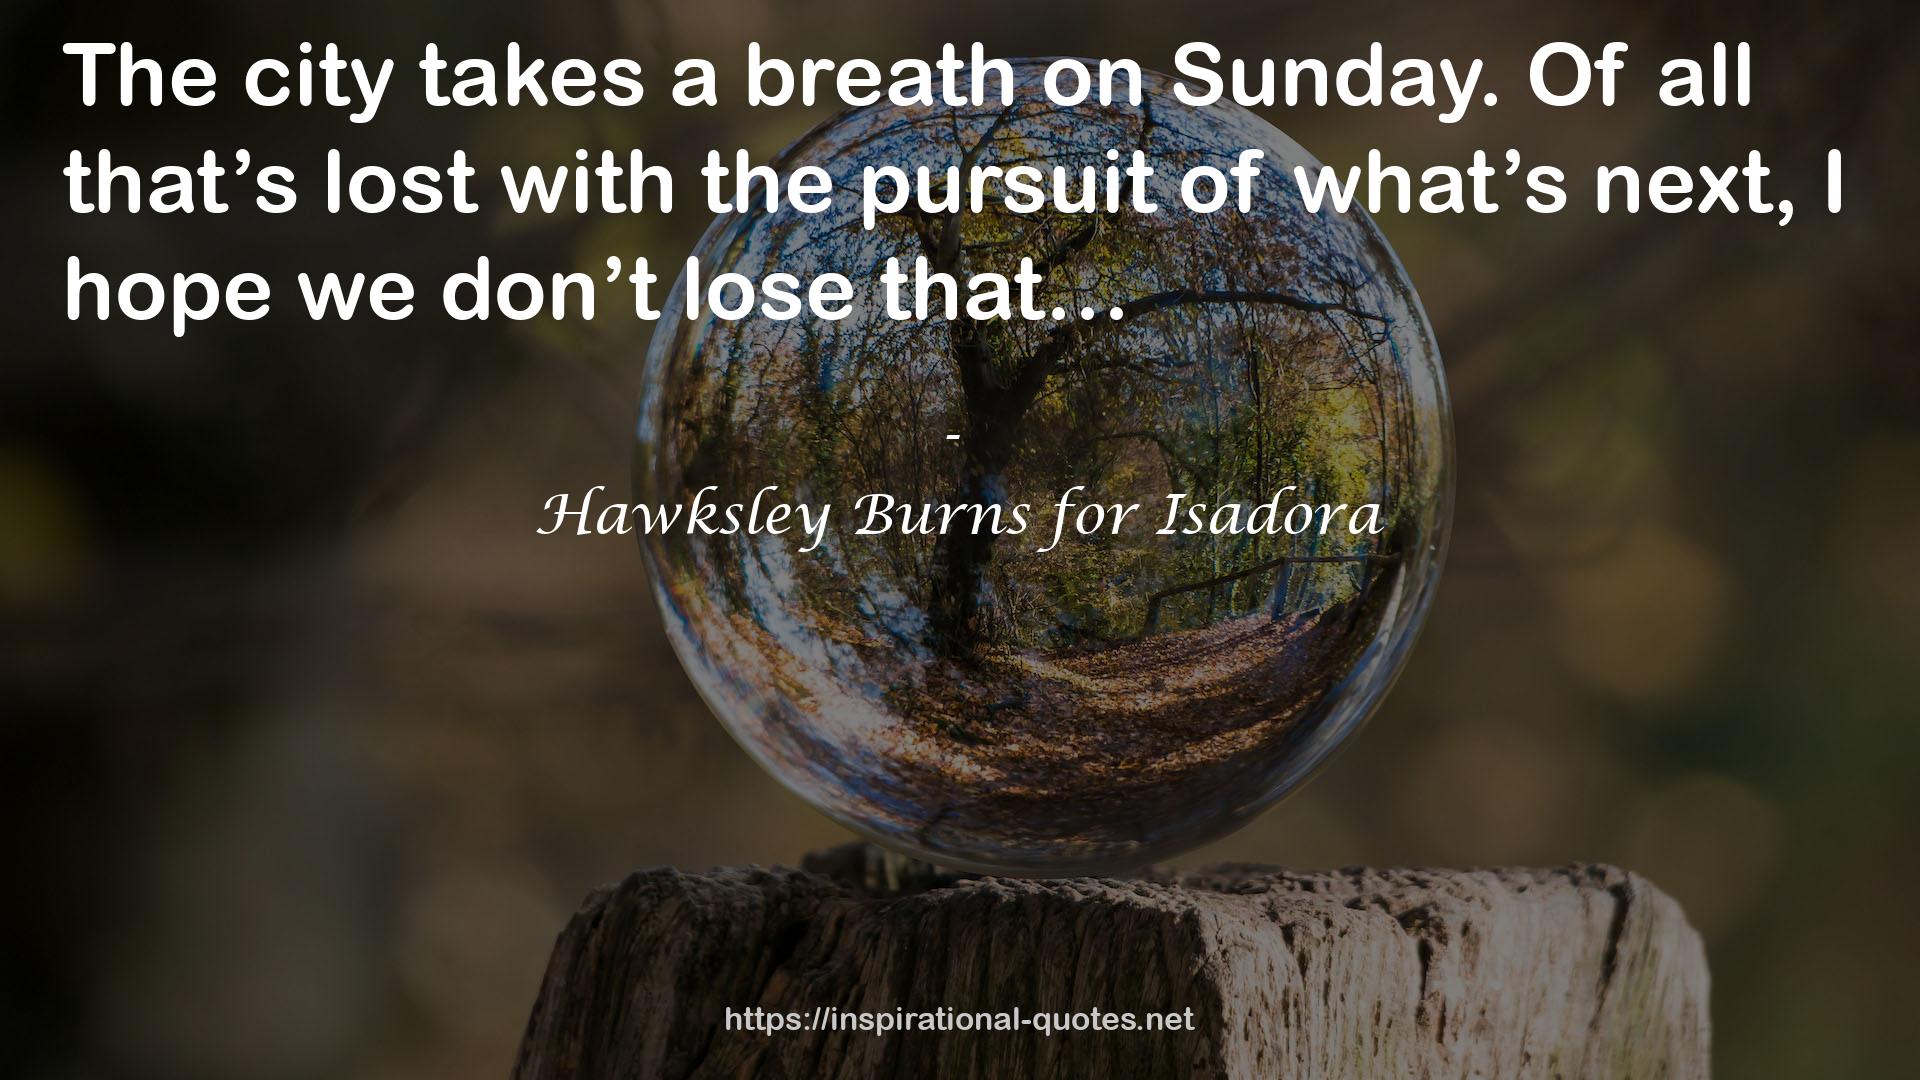 Hawksley Burns for Isadora QUOTES